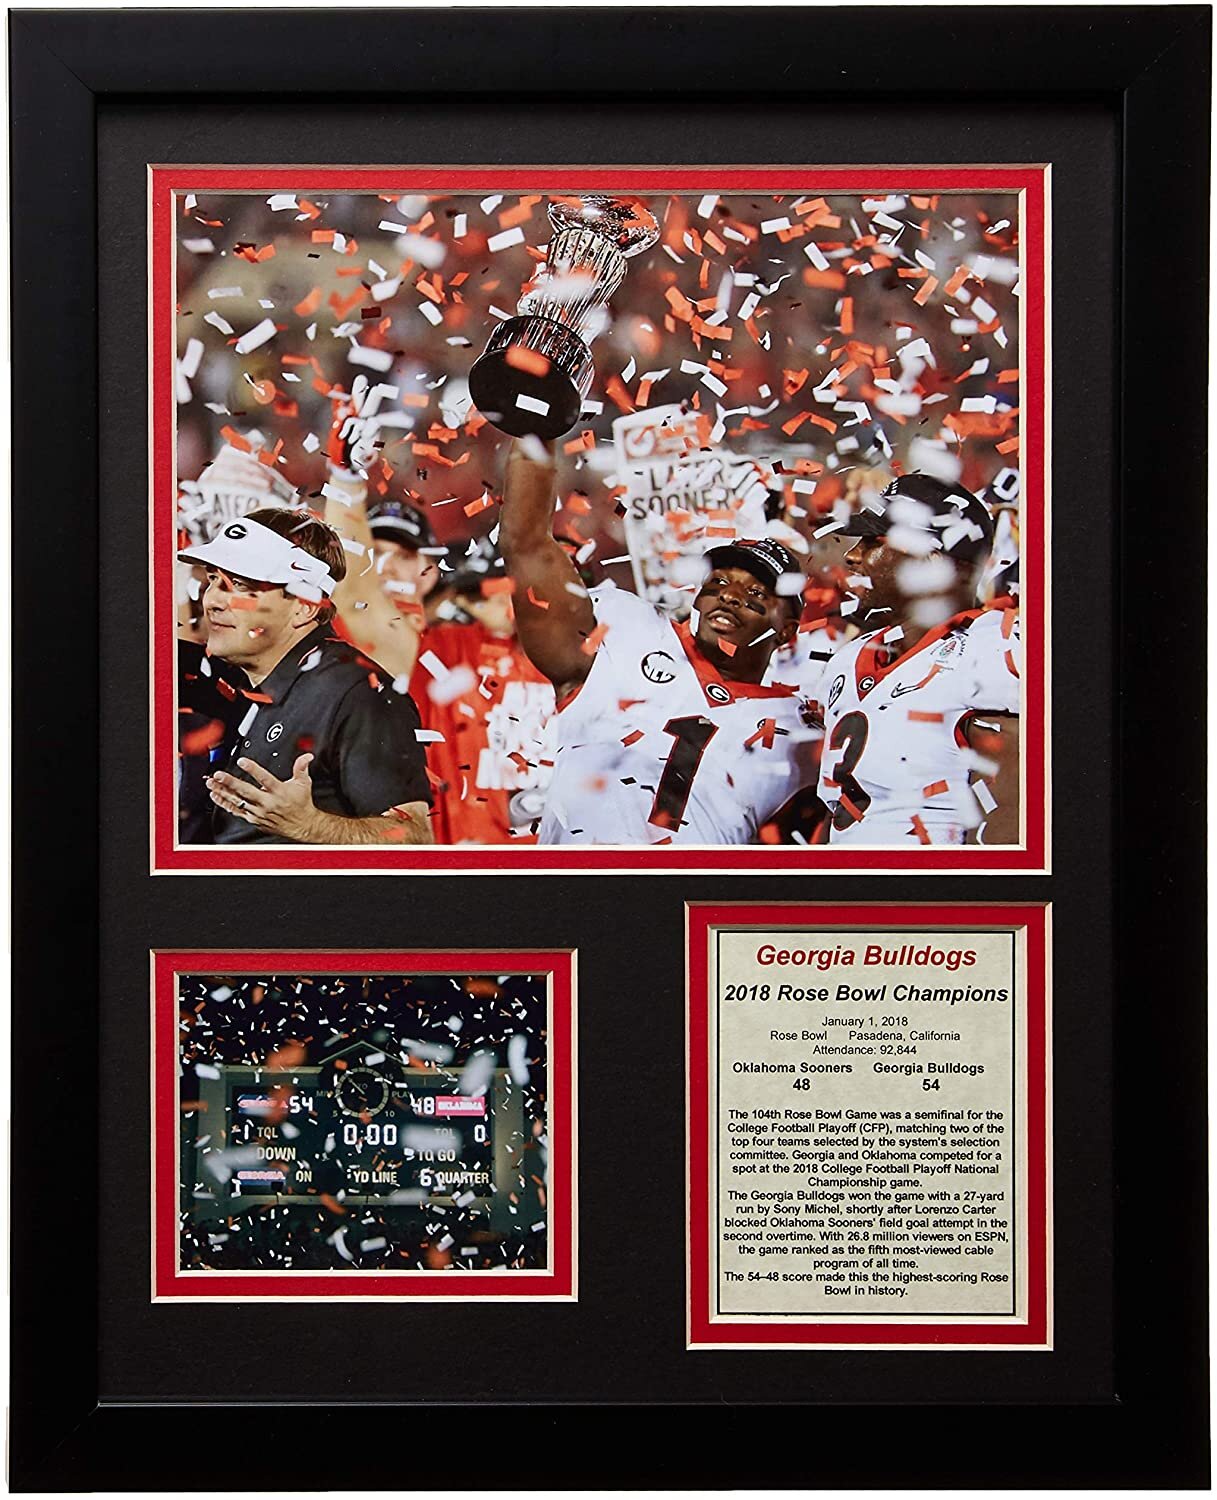 Friends Family and University of Georgia Bulldogs 2 x 3 Wood Photo Frame